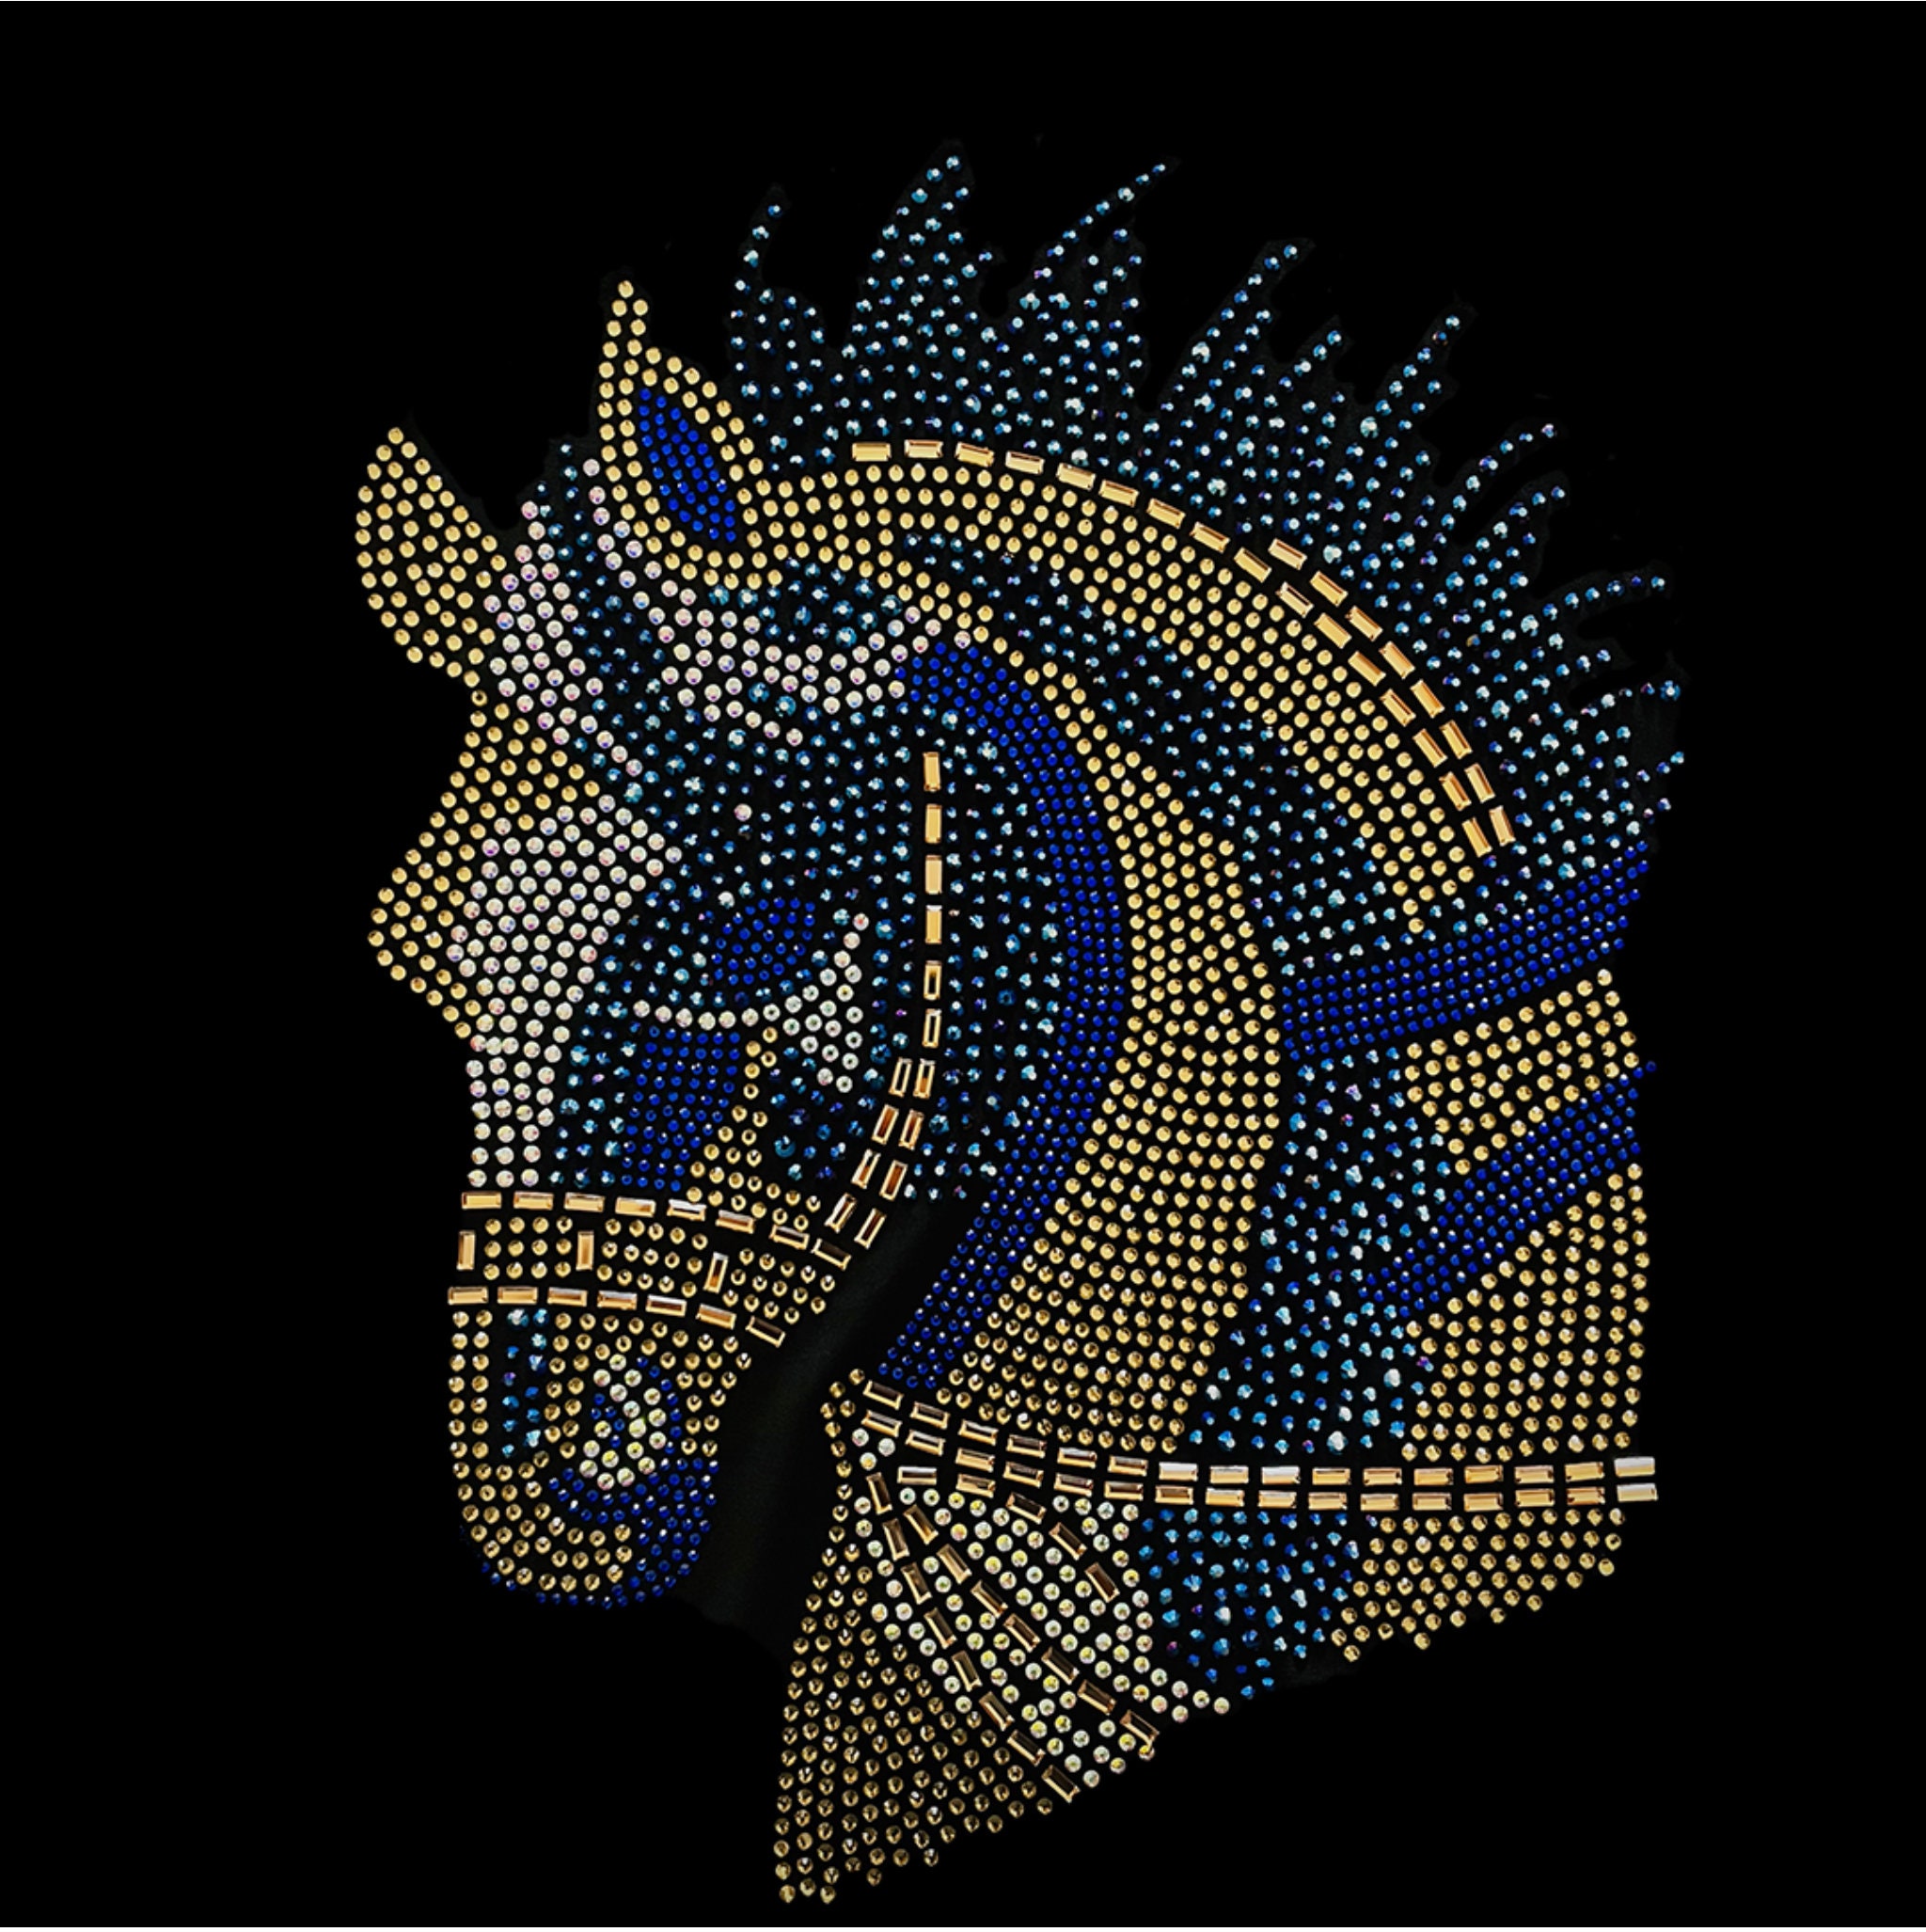 Horse Eye Decorative Sew on Rhinestones Crystals for Clothing - China  Rhinestones and Sewing Crystal price